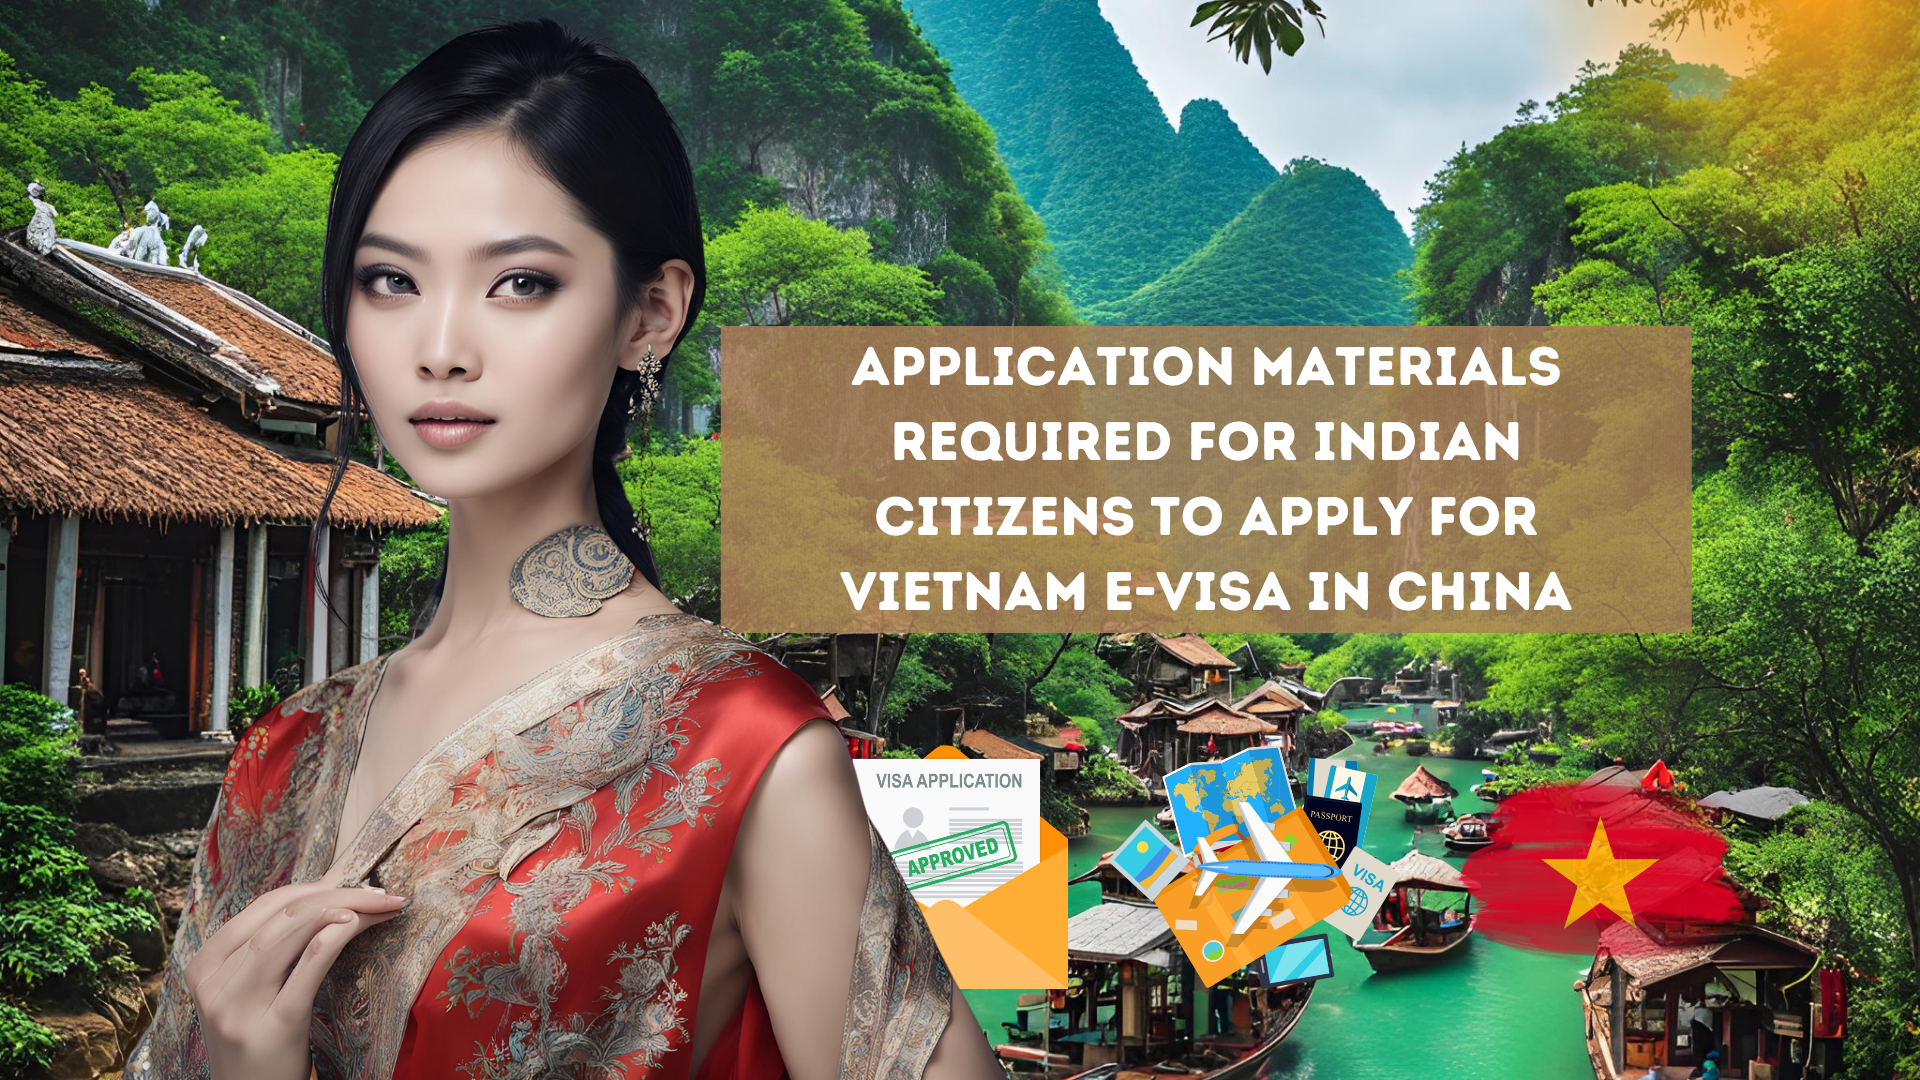 Application materials required for Indian citizens to apply for Vietnam e-visa in China